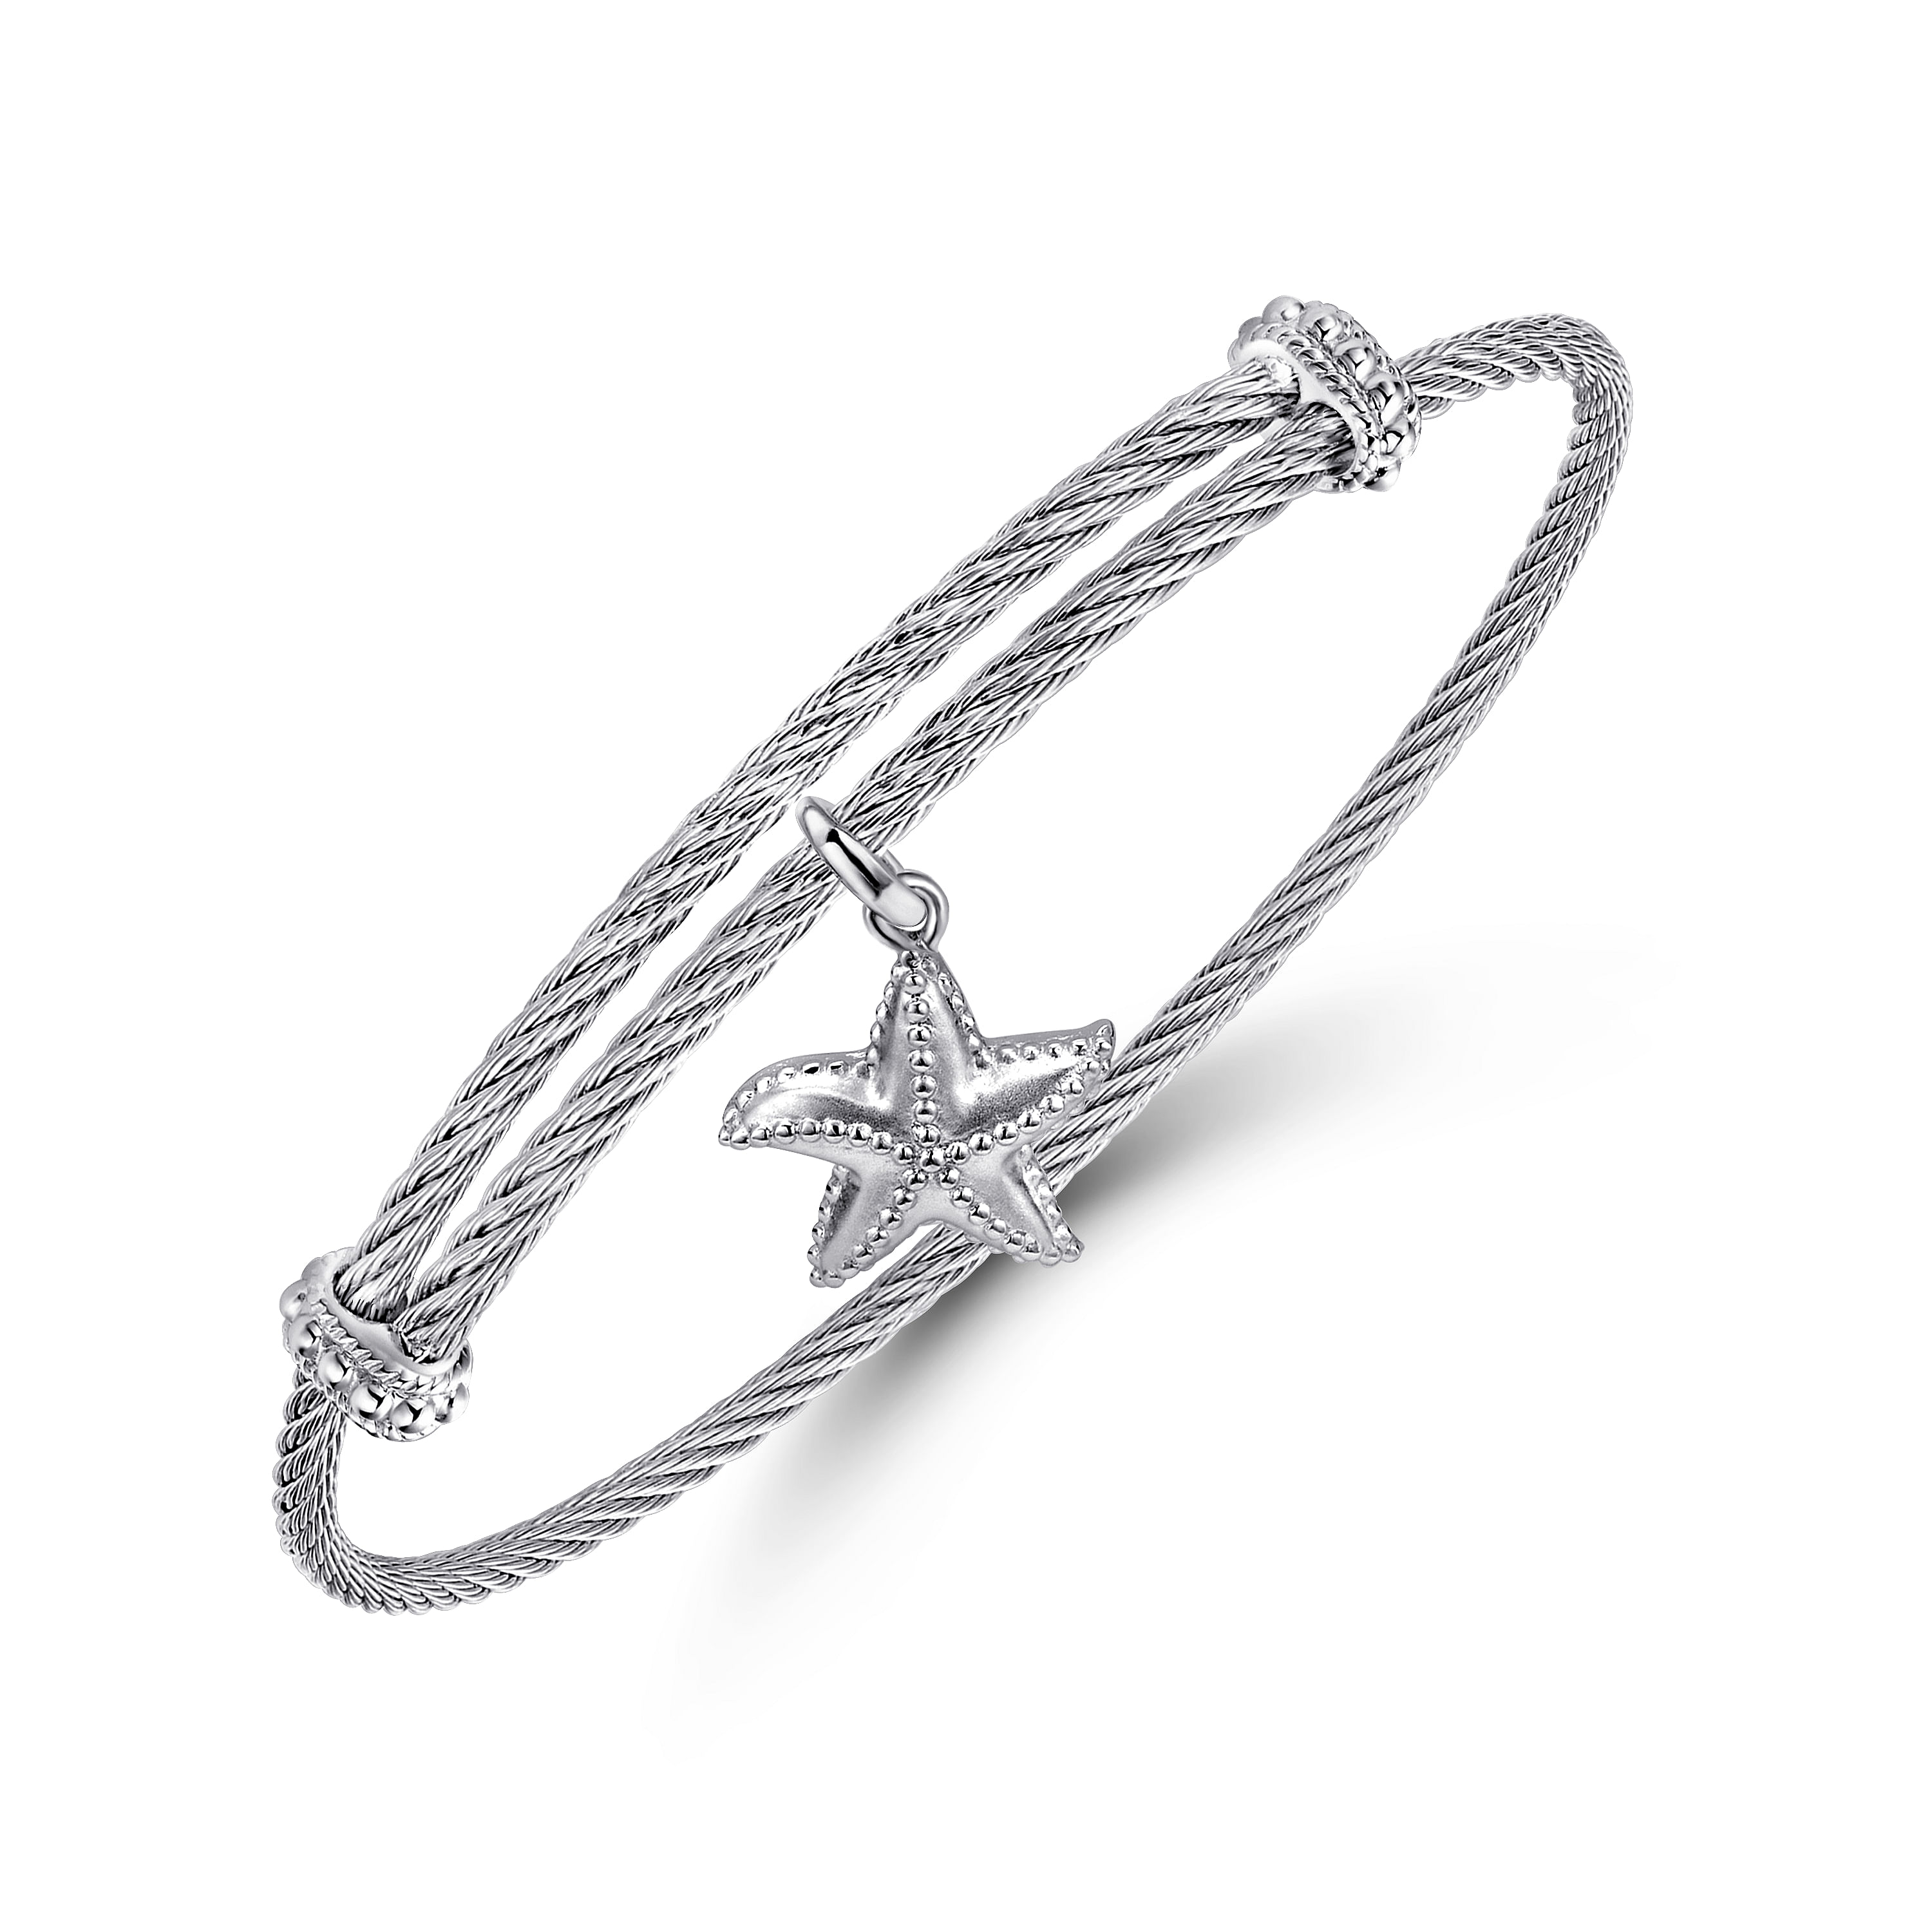 Adjustable Twisted Cable Stainless Steel Bangle with Sterling Silver Starfish Charm